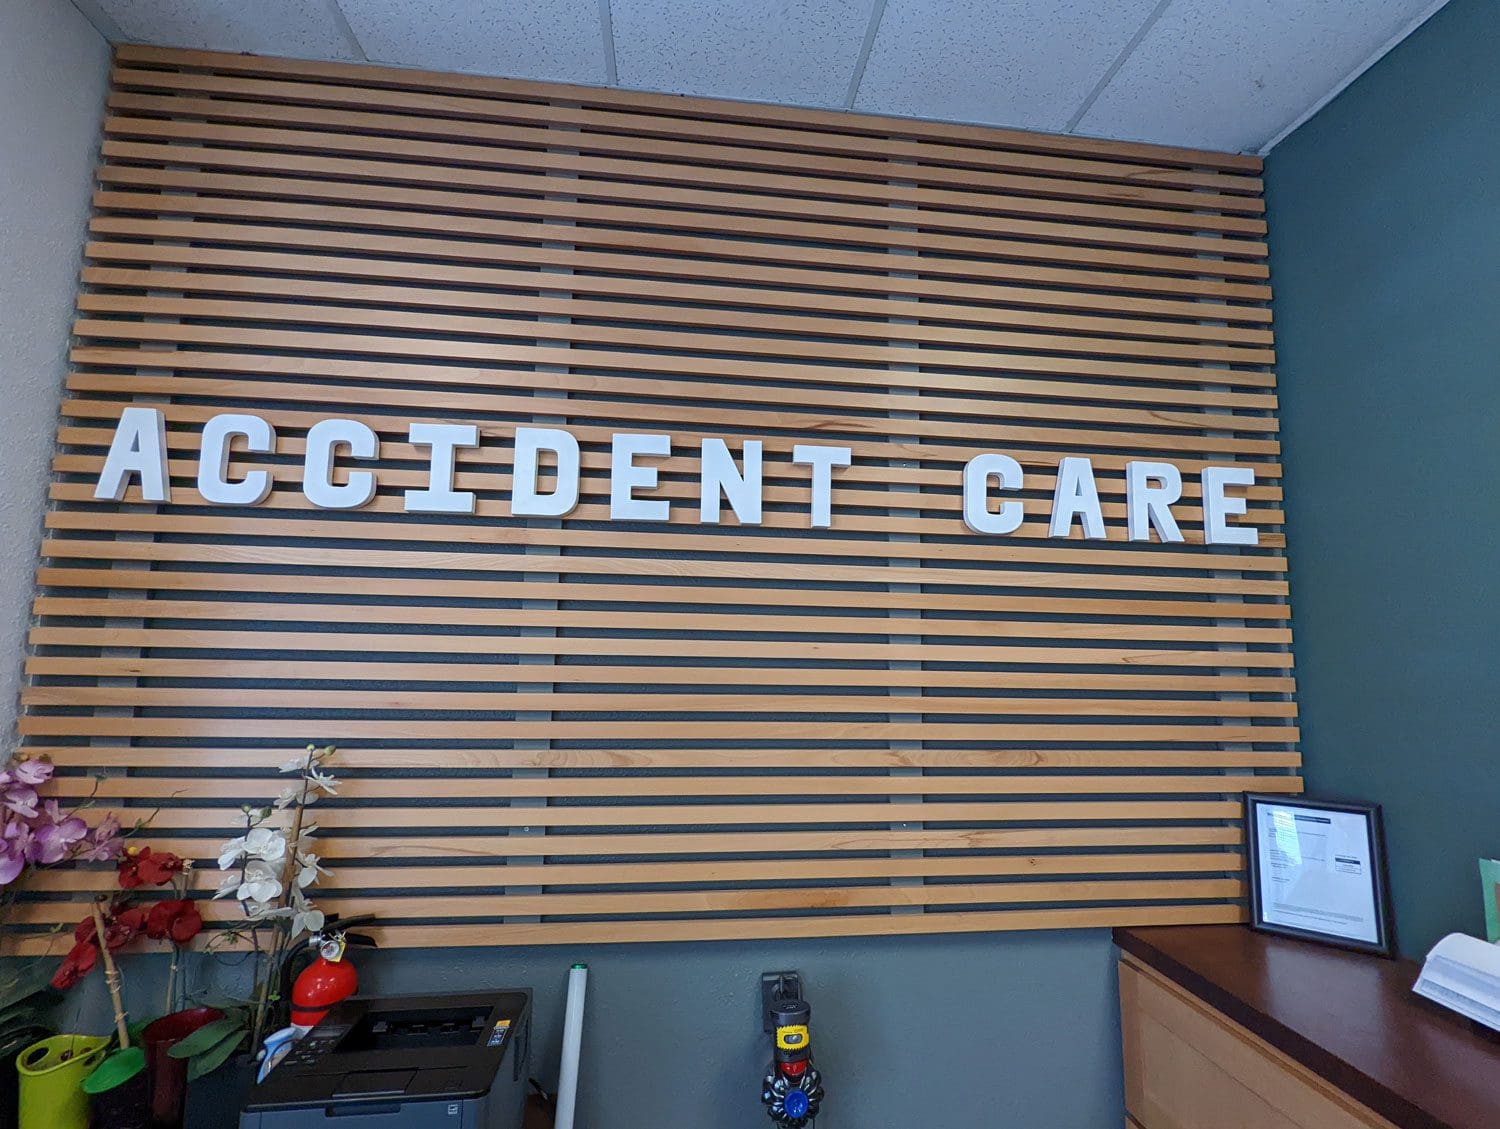 Accident Care sign in Beaverton OR.